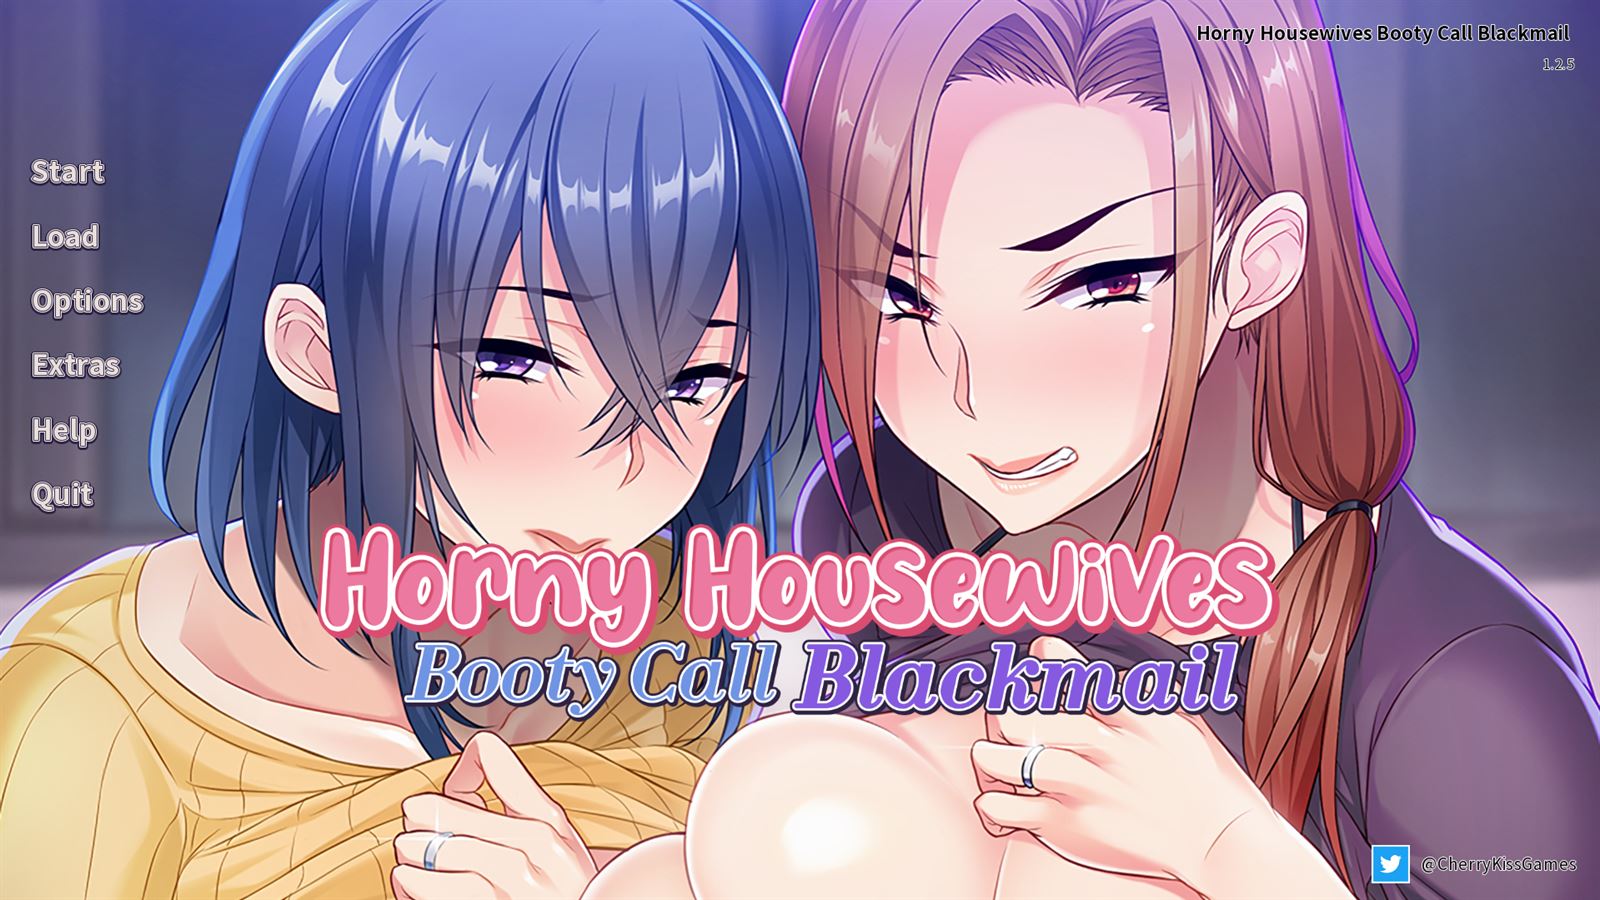 Horny Housewives Booty Call Blackmail porn xxx game download cover